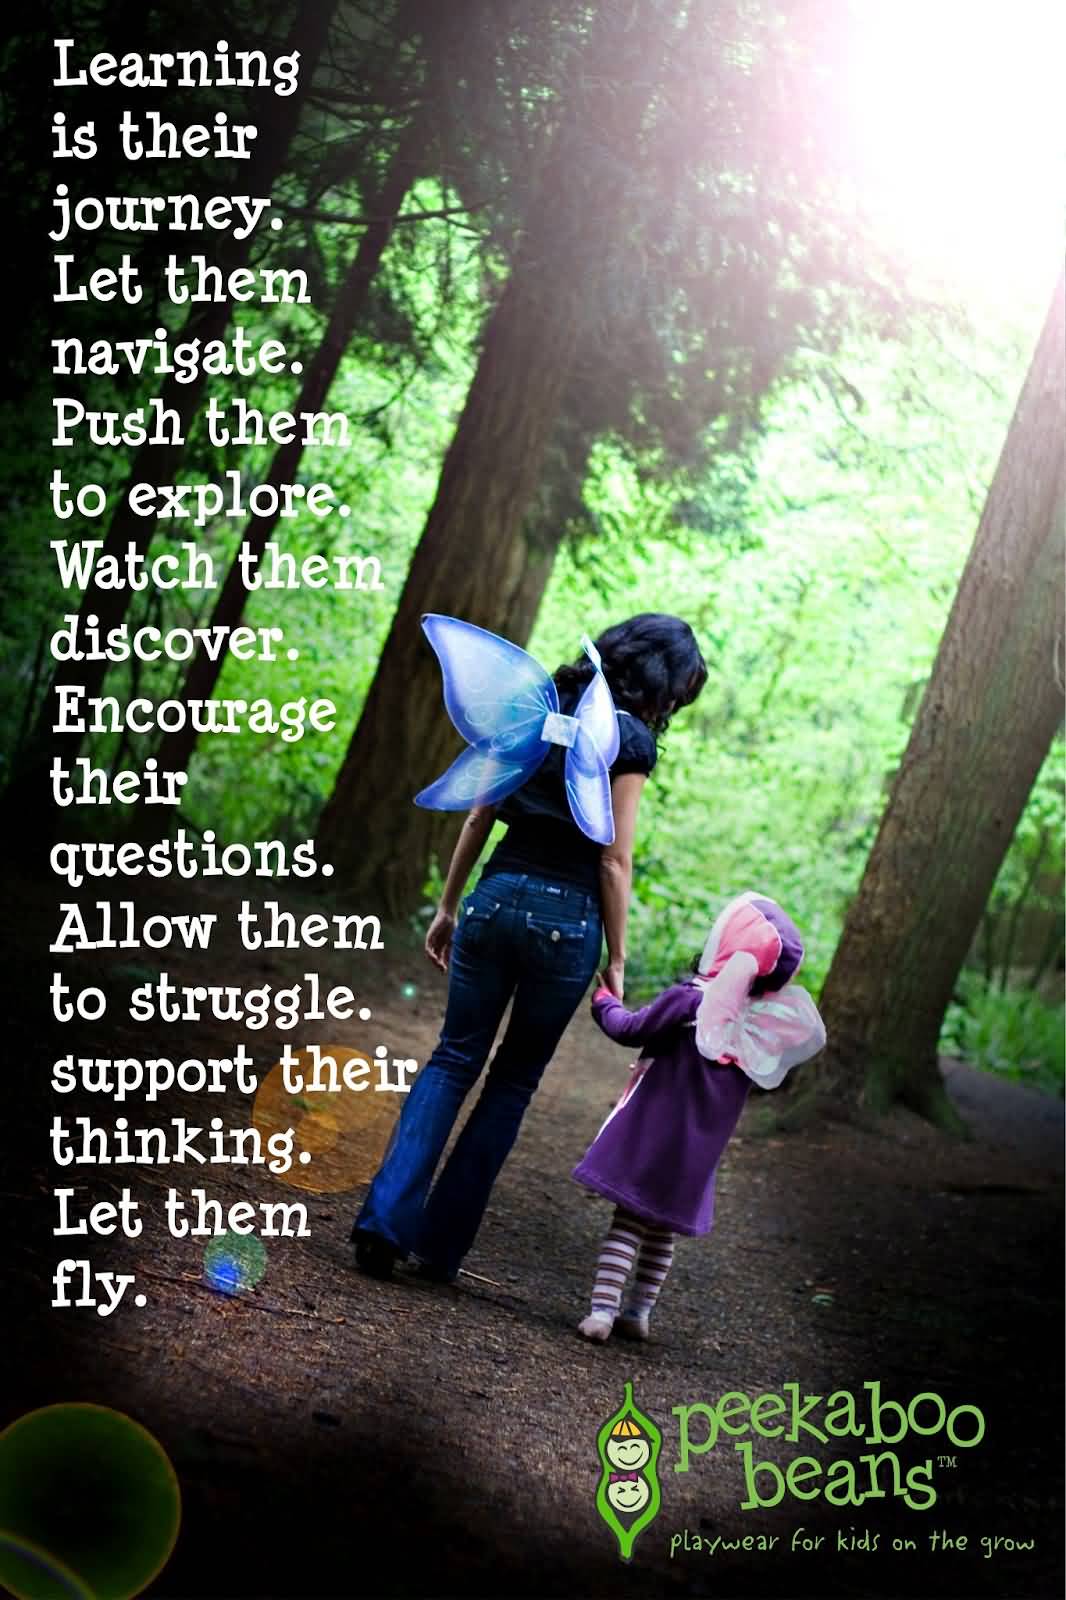 Learning is their journey. Let them navigate. Push them to explore. Watch them discover. Encourage their questions. Allow them to struggle. Support their thinking. Let them fly.